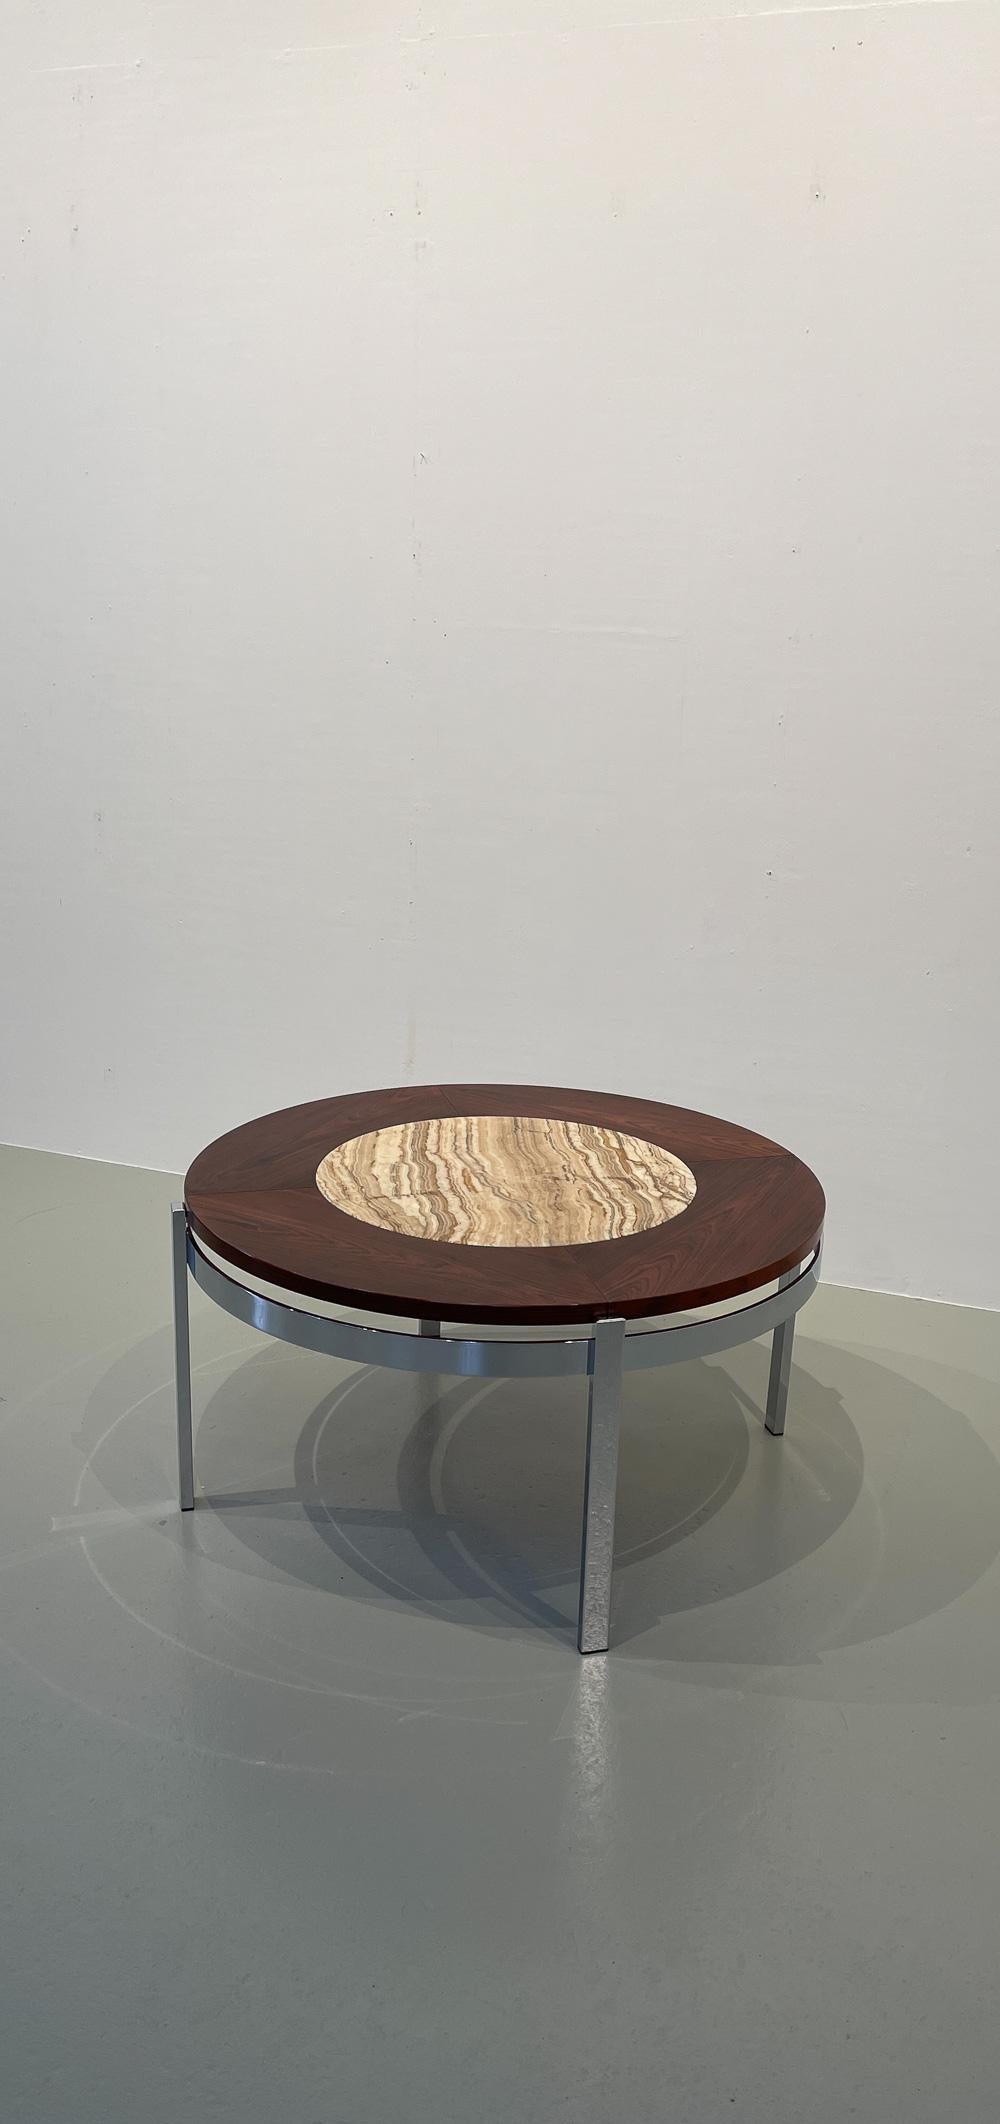 Danish Modern Round Rosewood and Marble Coffee Table by Bendixen Design, 1970s. For Sale 12